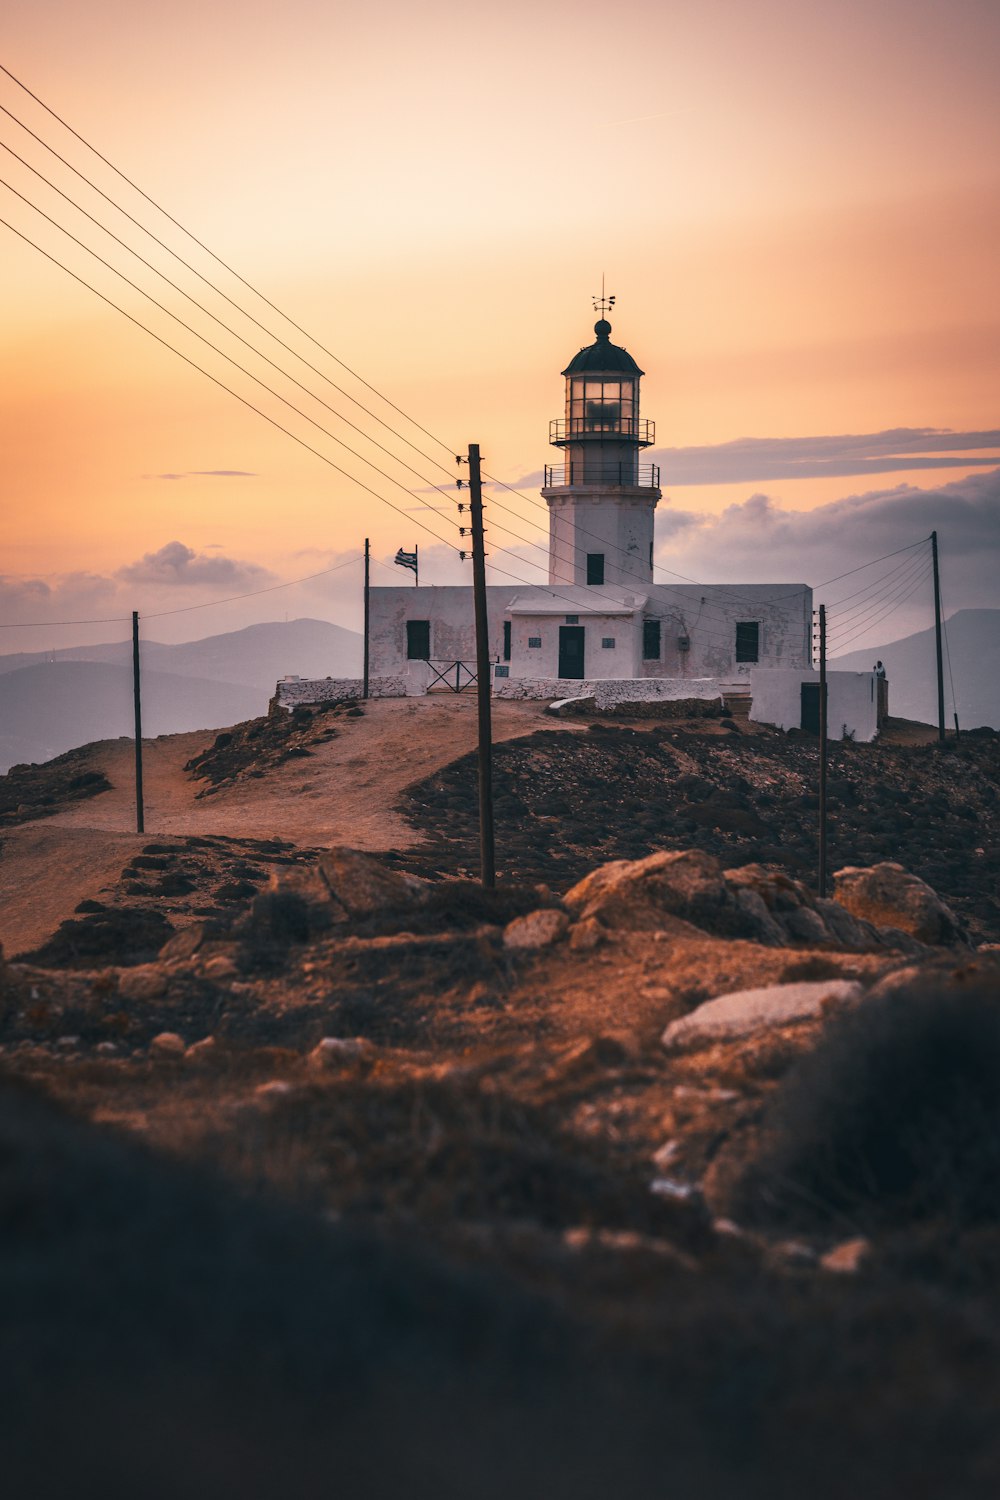 a light house sitting on top of a hill